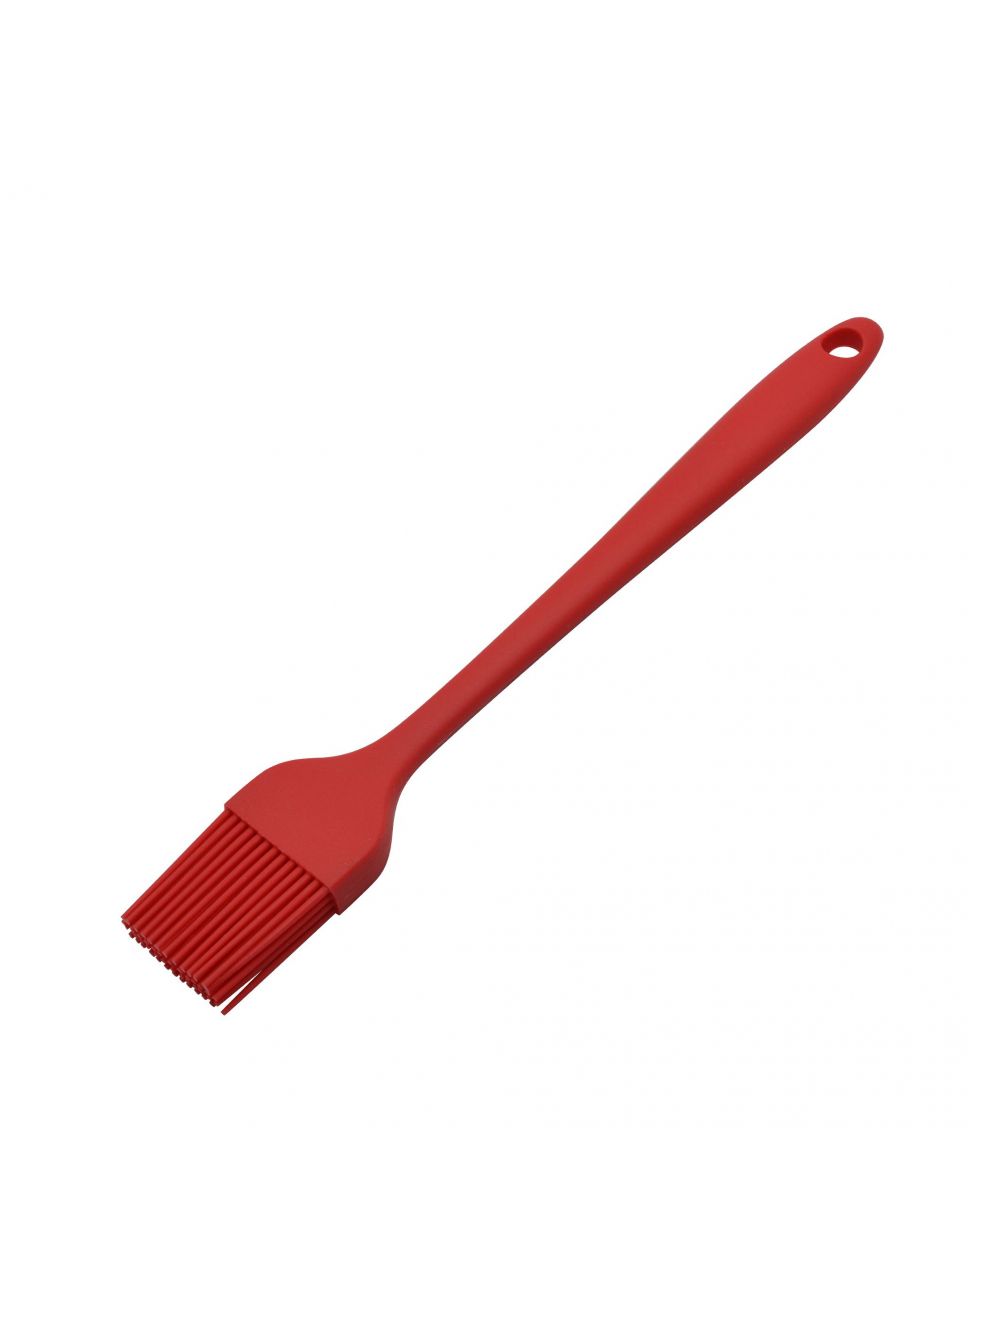 RK Silicon Pastry Brush Size Red-RNTP22-R